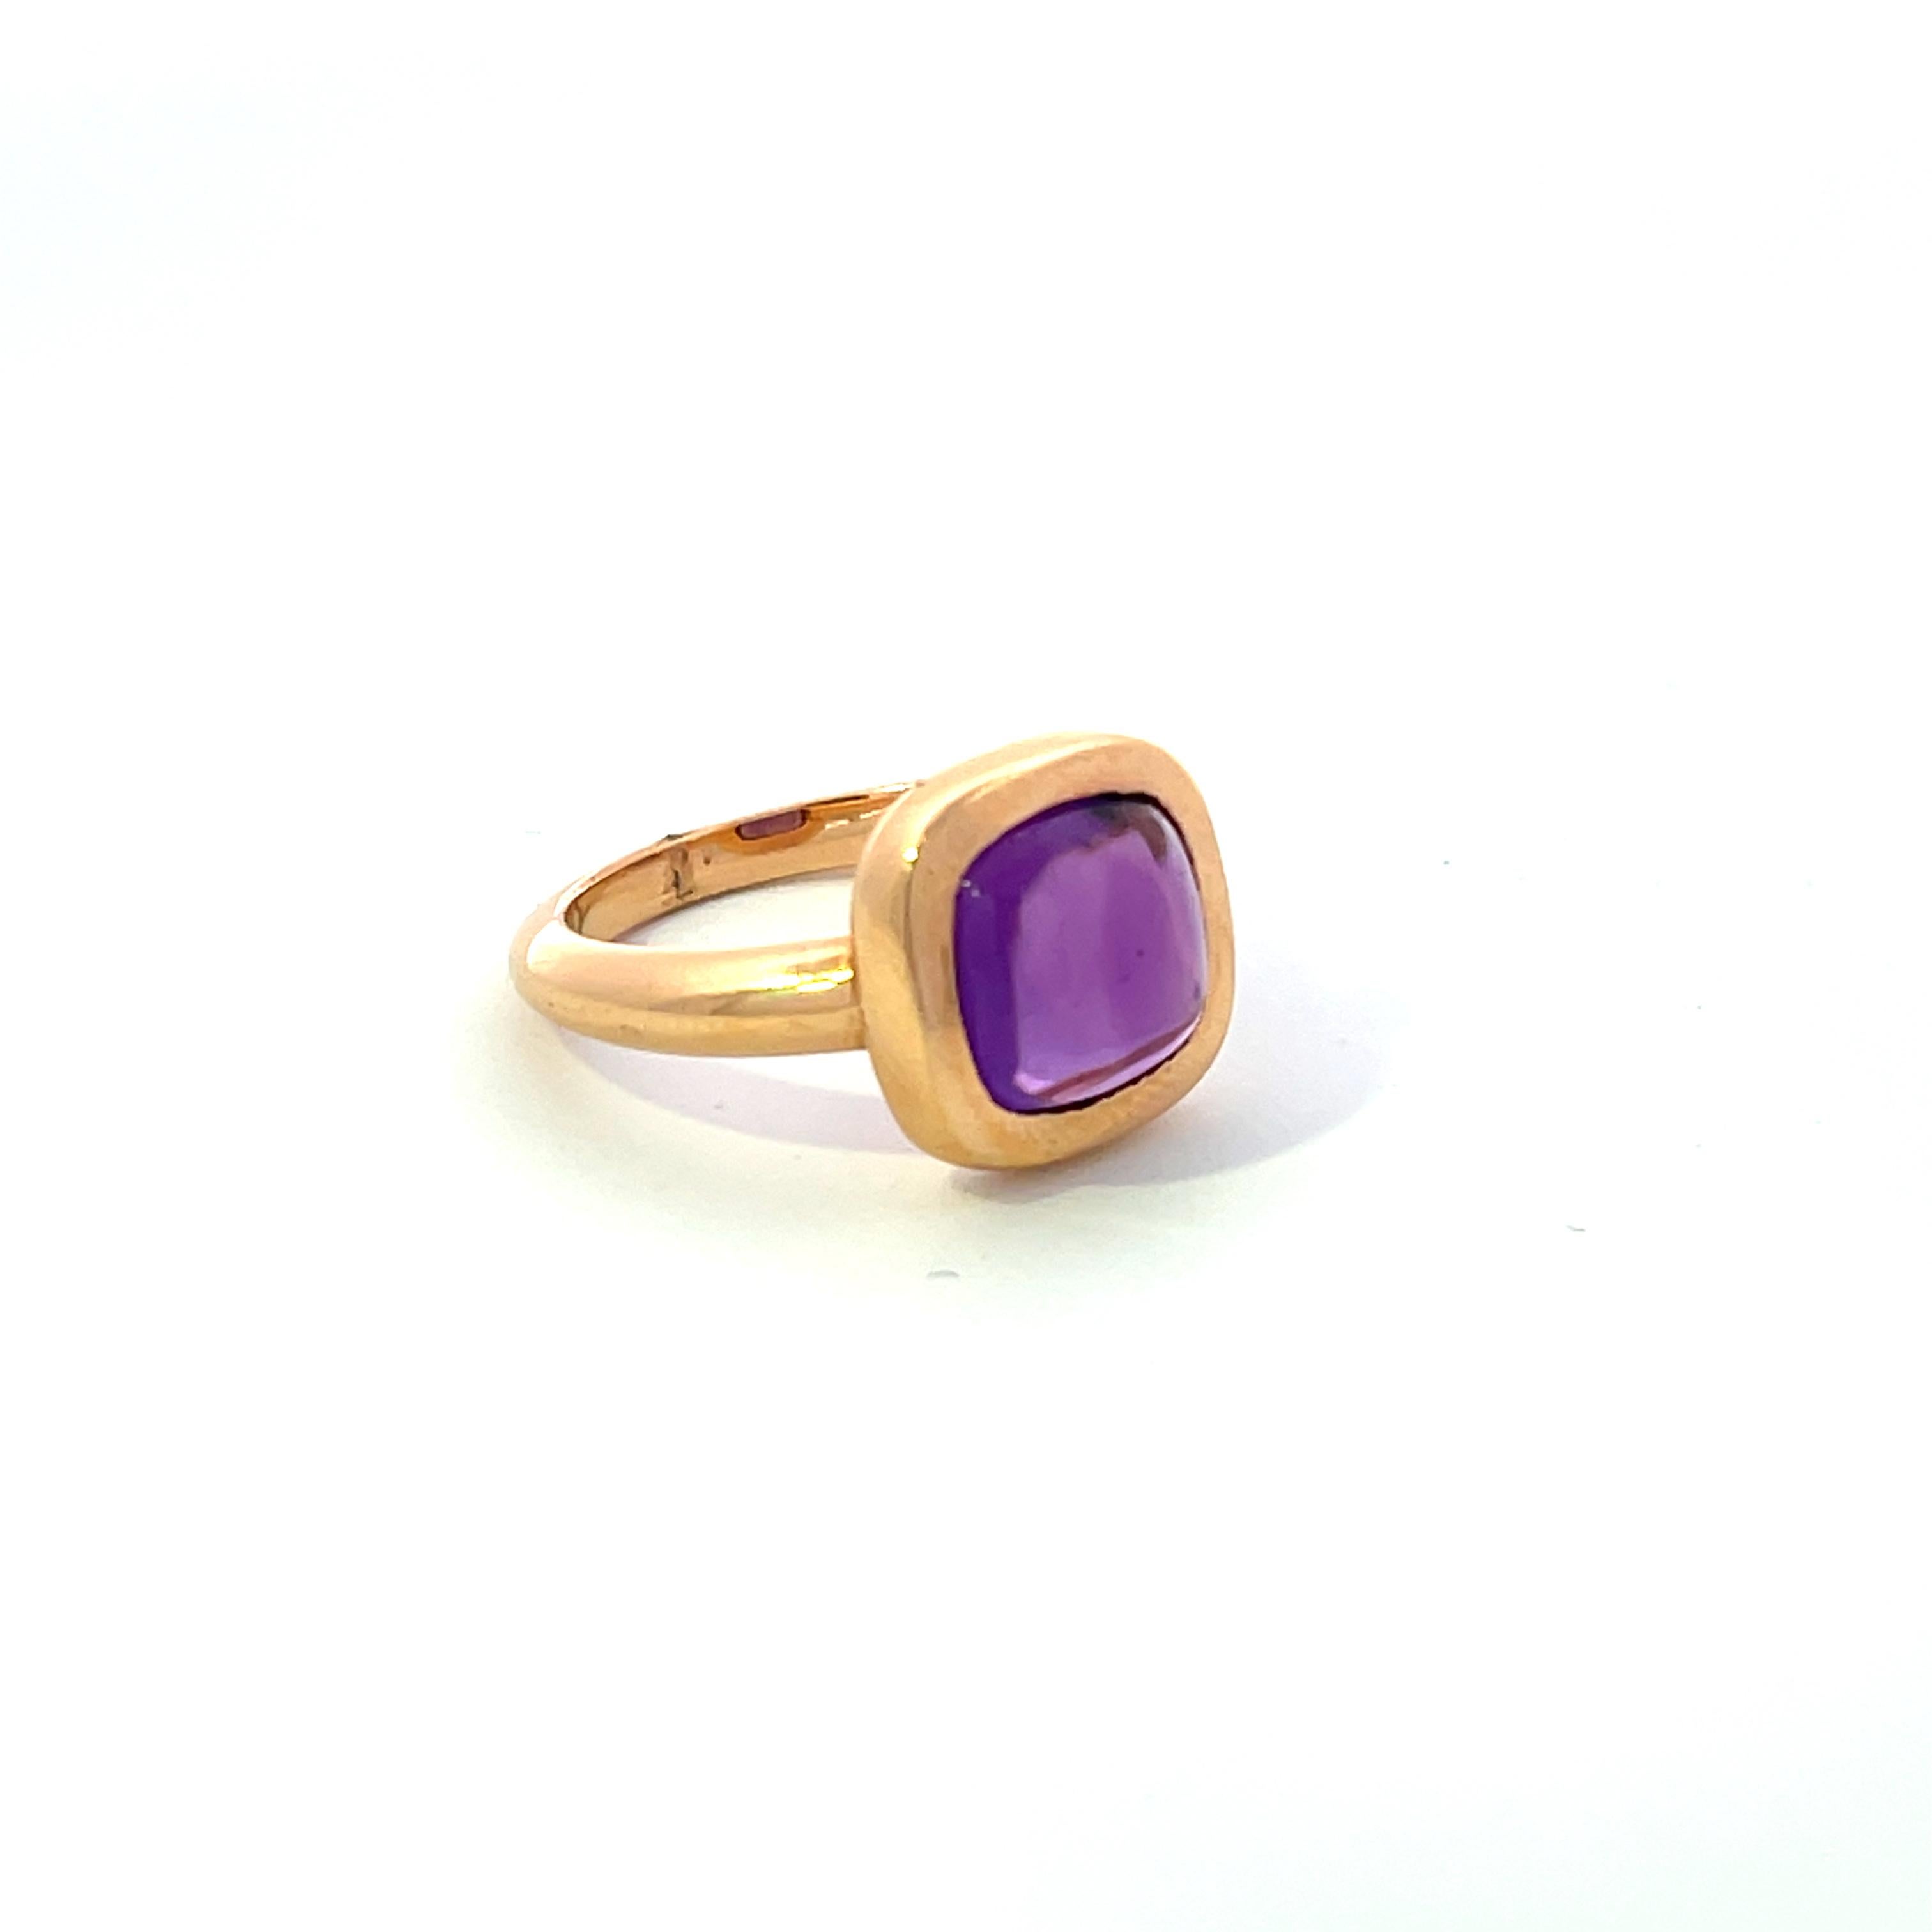 The ring is set in 18K Rose Gold with a 3.05ct Cabochon Amethyst Center. The amethyst is in a bezel setting and is currently at a size 5.75 but can be resized. 
